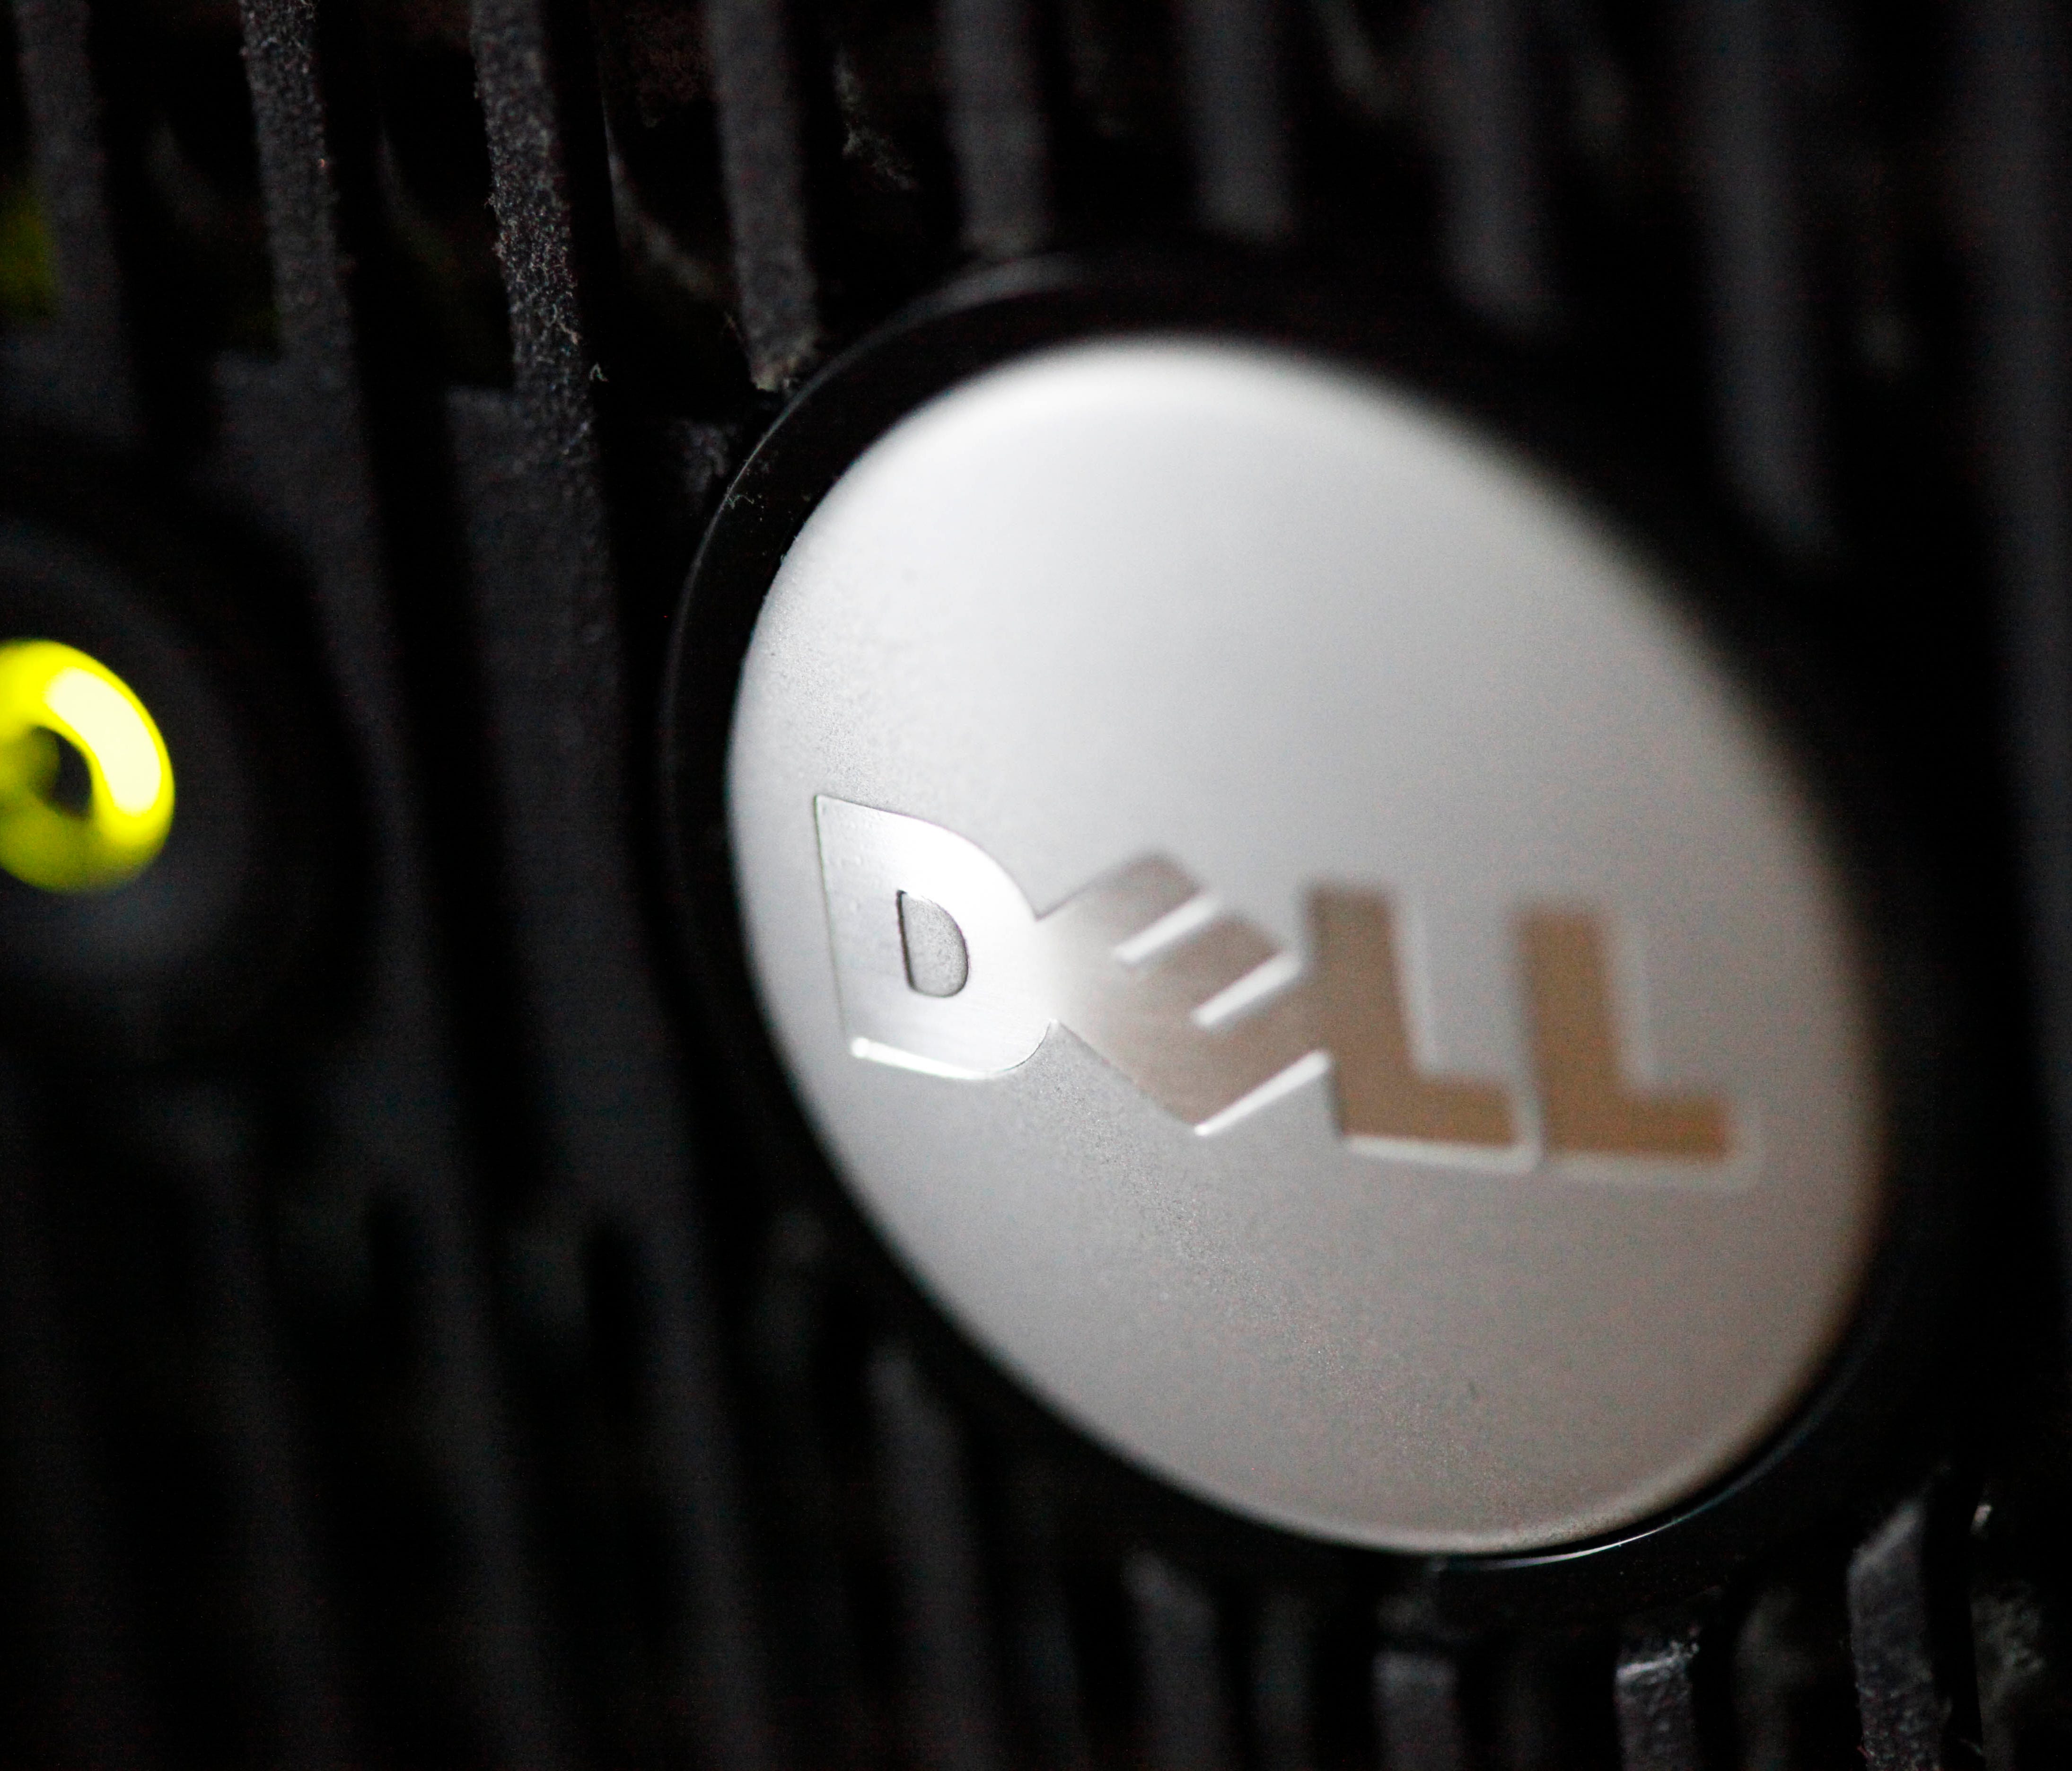 File photo taken in 2011 shows the Dell logo on one of the tech giant's computers.